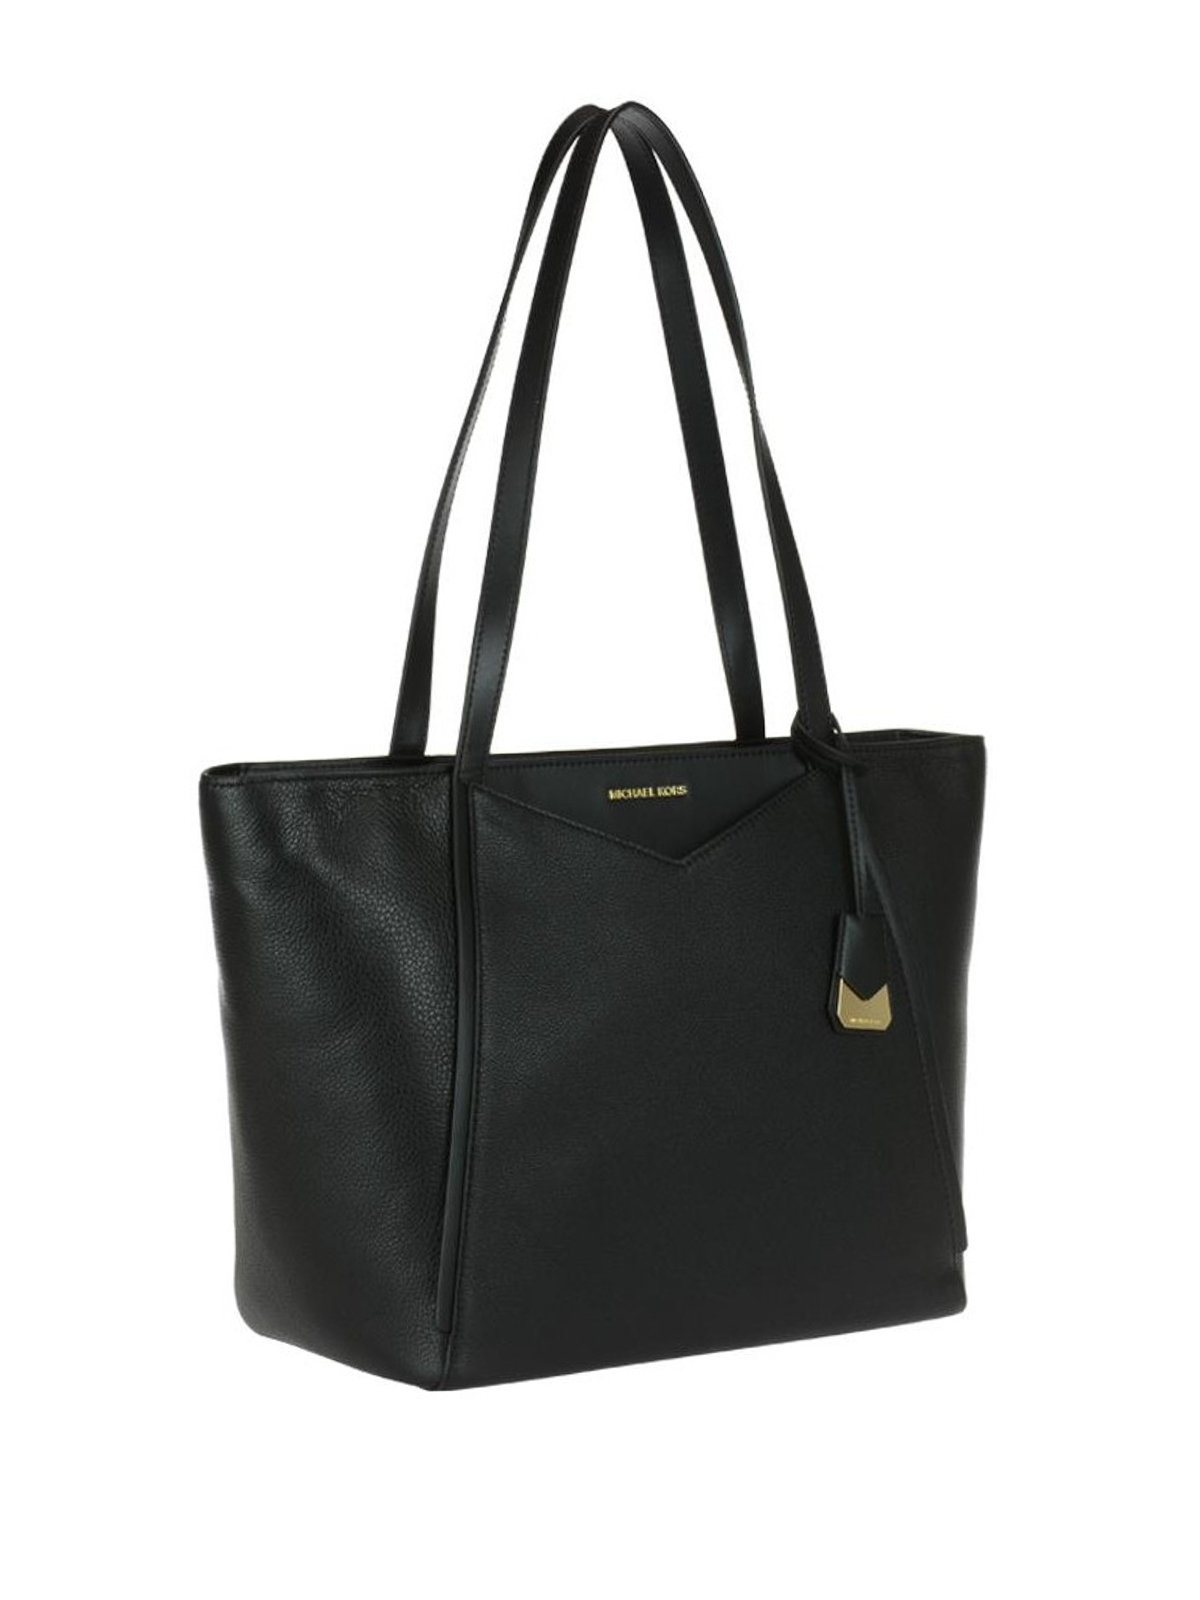 Michael Kors - Whitney black leather large tote - totes bags - 30S8GN1T3L001